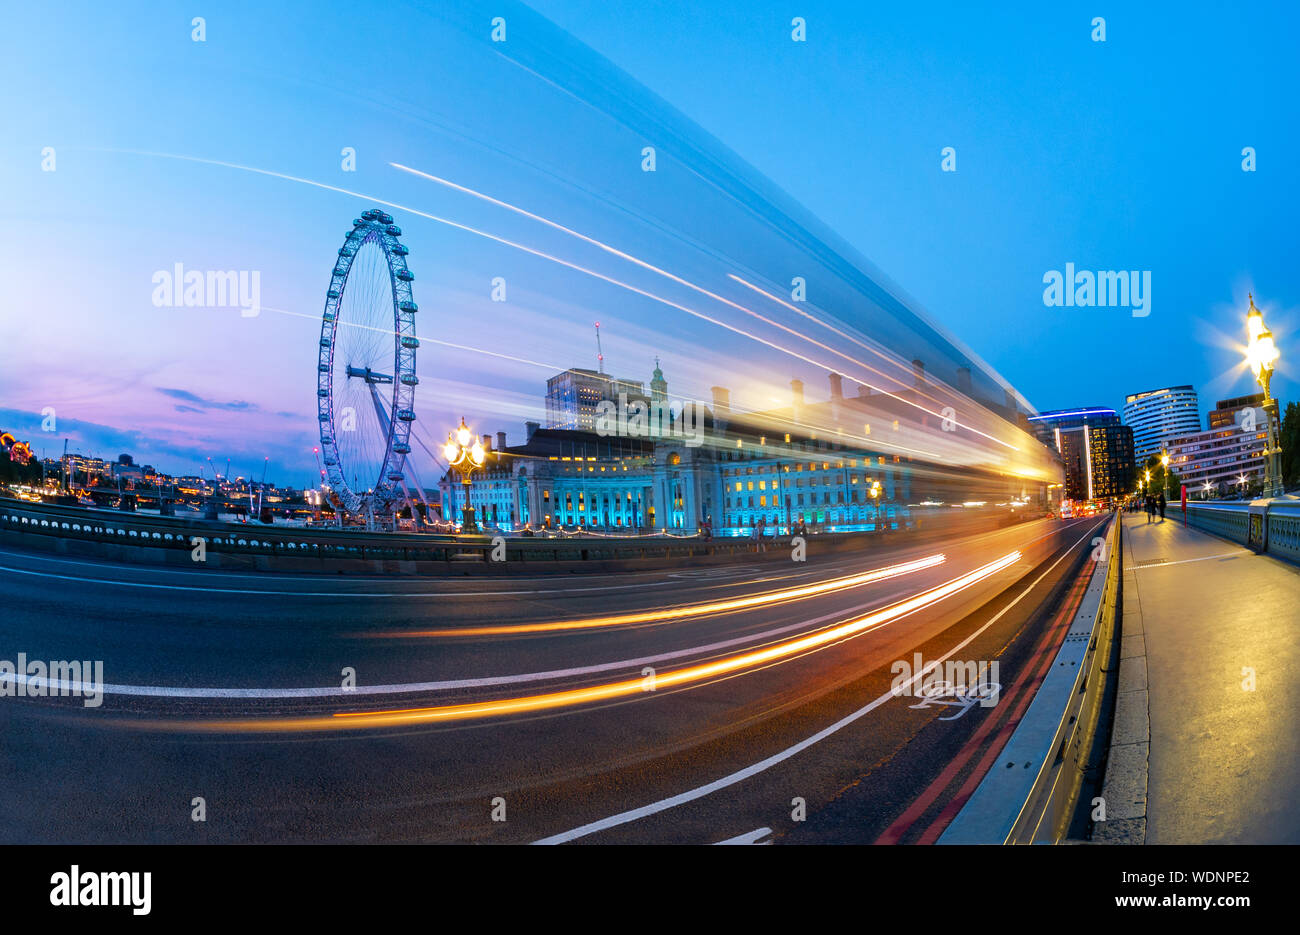 Cityscape of London at blue hour, view from the bridge of Westminster over the eye wheel and car traces on the road, in England, UK Stock Photo